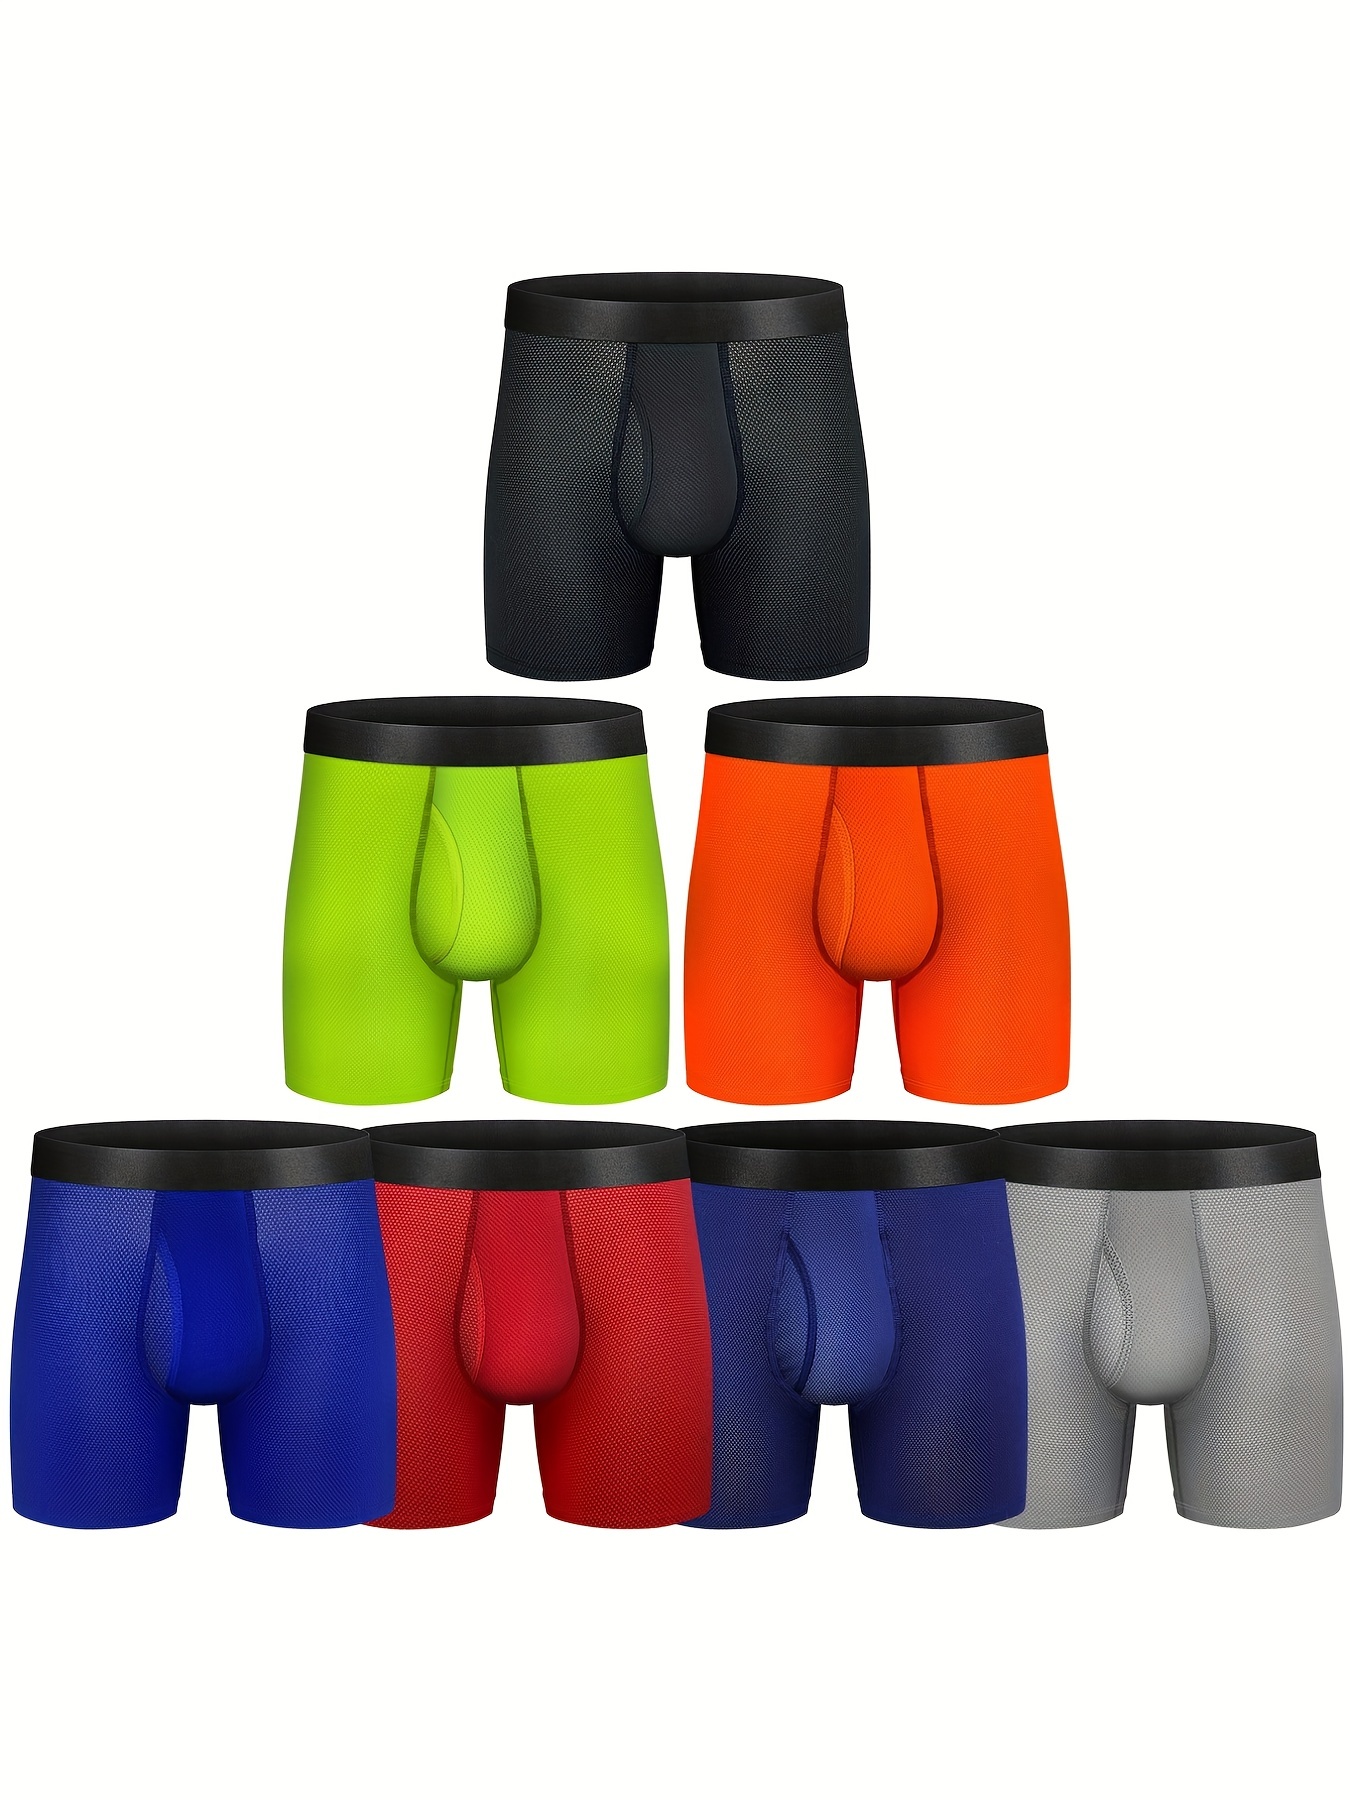 Soft casual male underwear For Comfort 